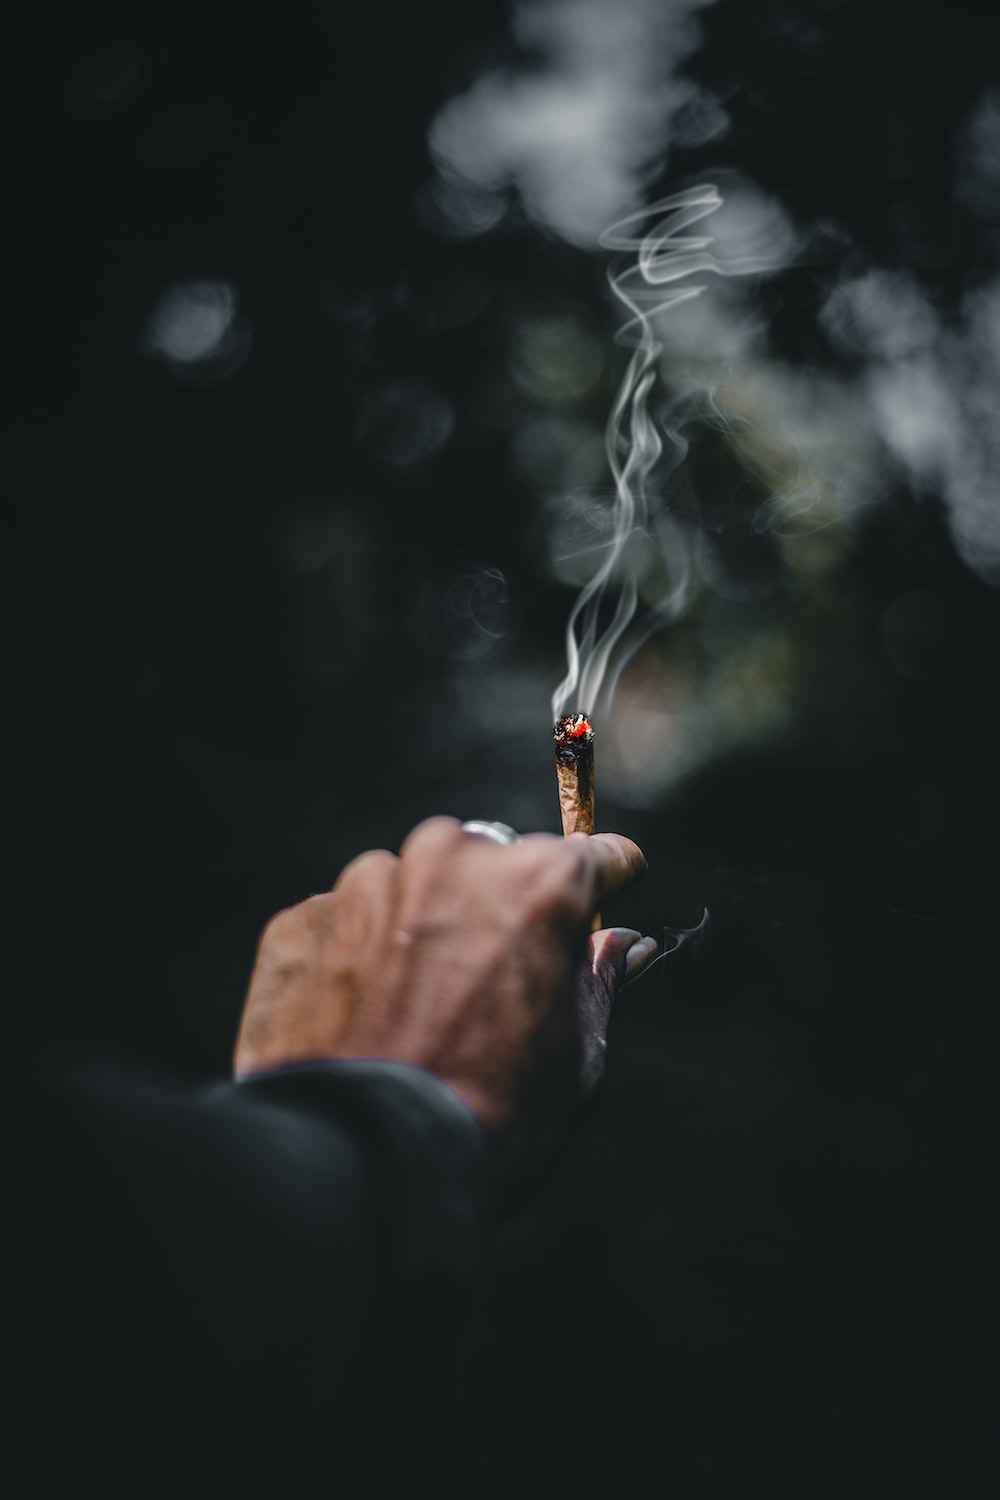 Cigarette smoke pictures download free images on